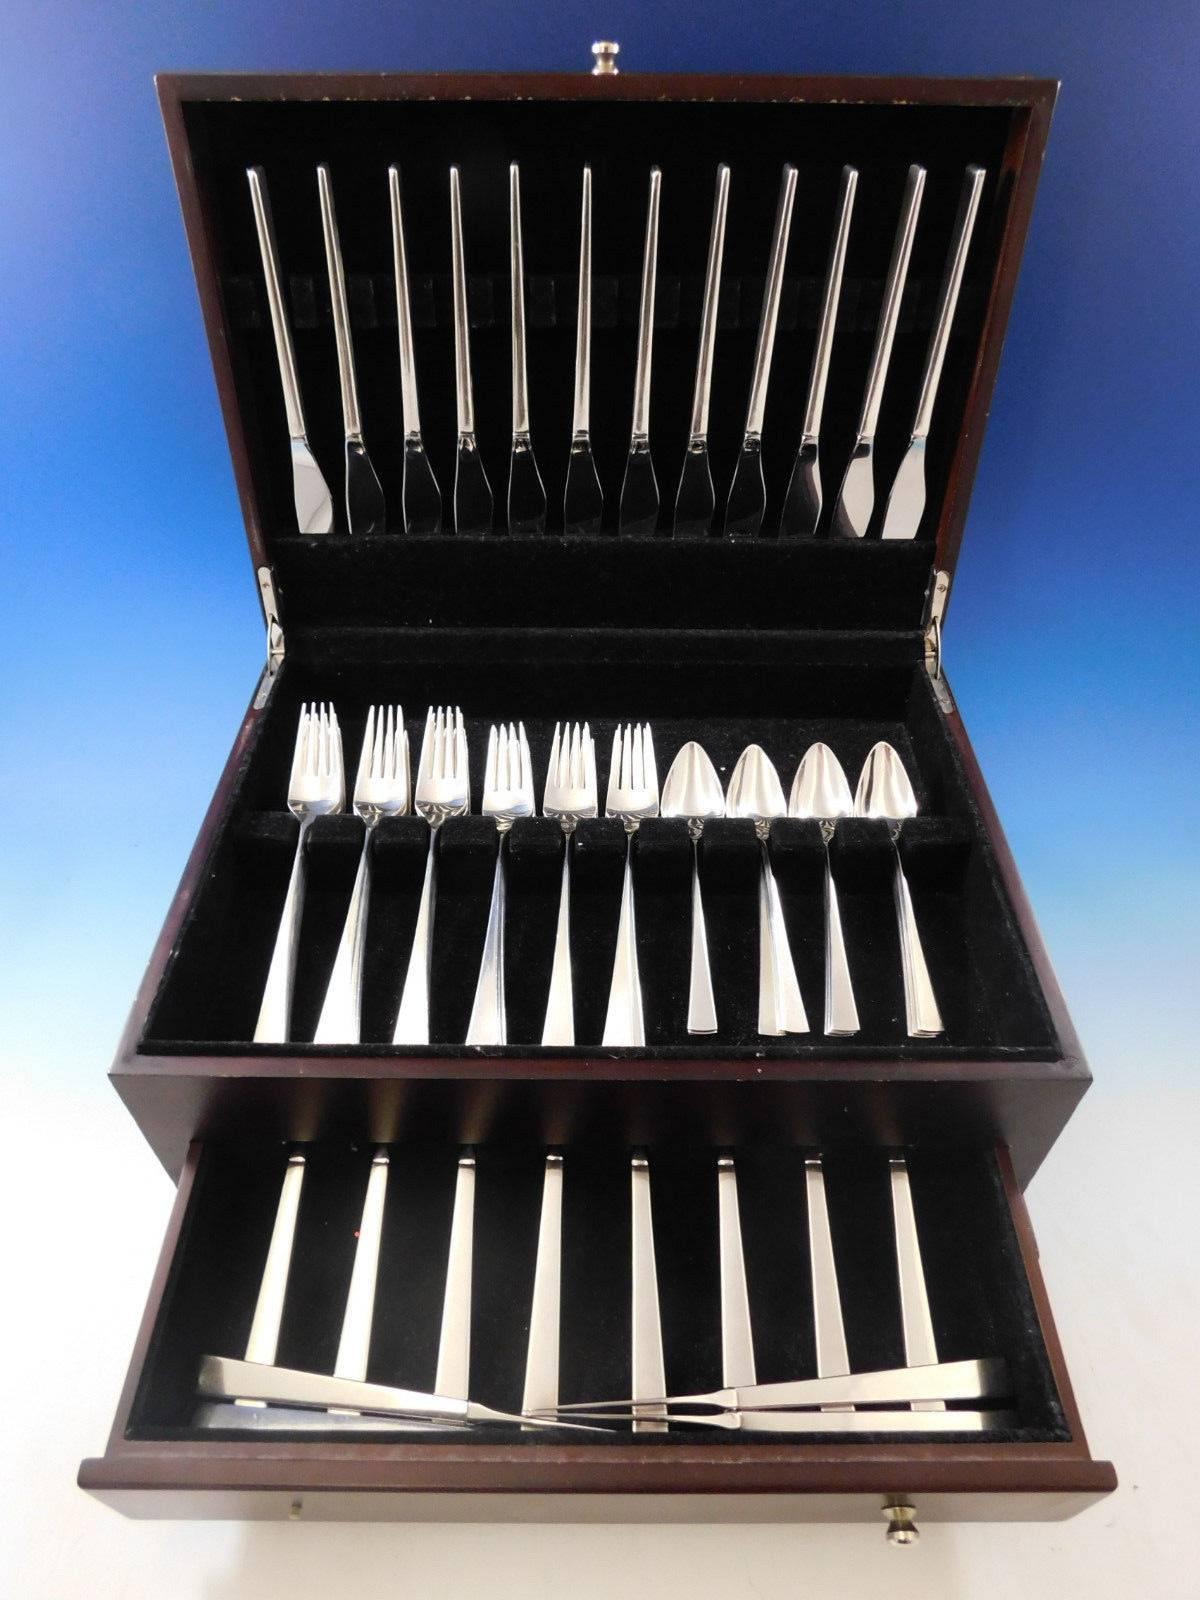 Dimension by Reed & Barton sterling silver Flatware set - 60 pieces. This set includes:

Measure: 12 knives, 9 1/8